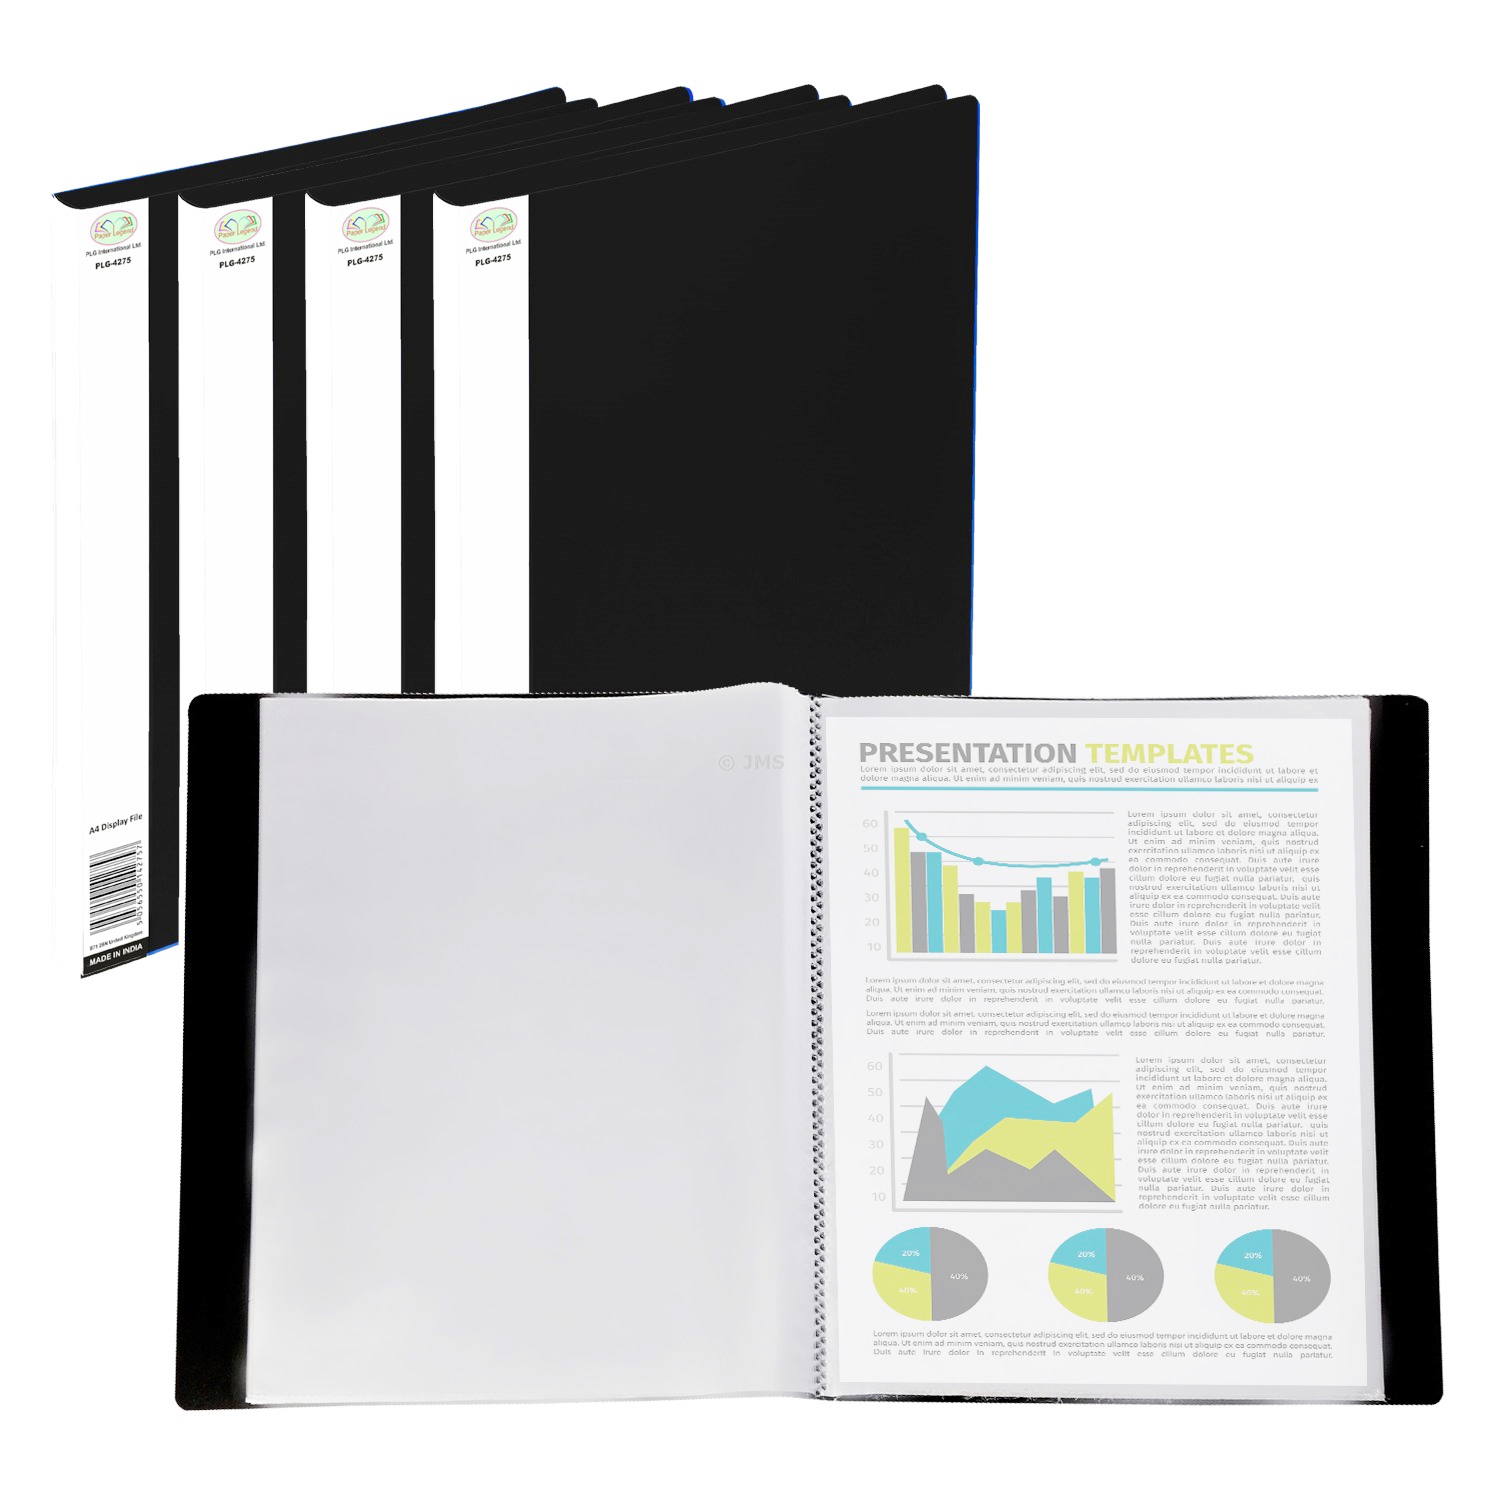 20 Pockets A4 Display Folders (Pack of 50) Portfolio Project Display Book with Plastic Sleeves Black 40 View Page Poly Presentation Folder for Portfolio, Certificate, Document, Paperwork Organiser Holder Case